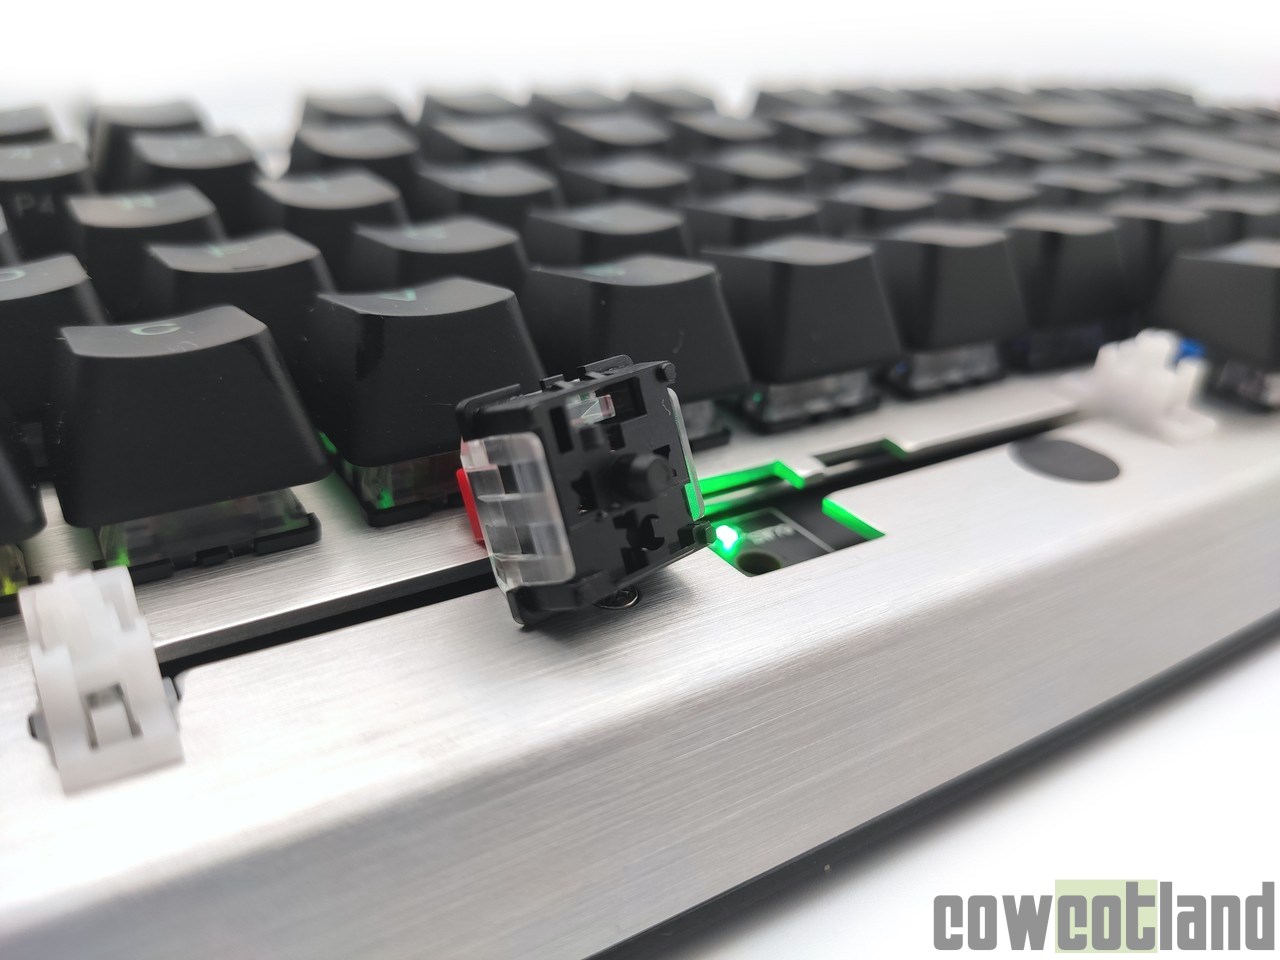 Image 46352, galerie Test clavier mcanique Cooler Master CK351 : switches optiques et hot-swappables !